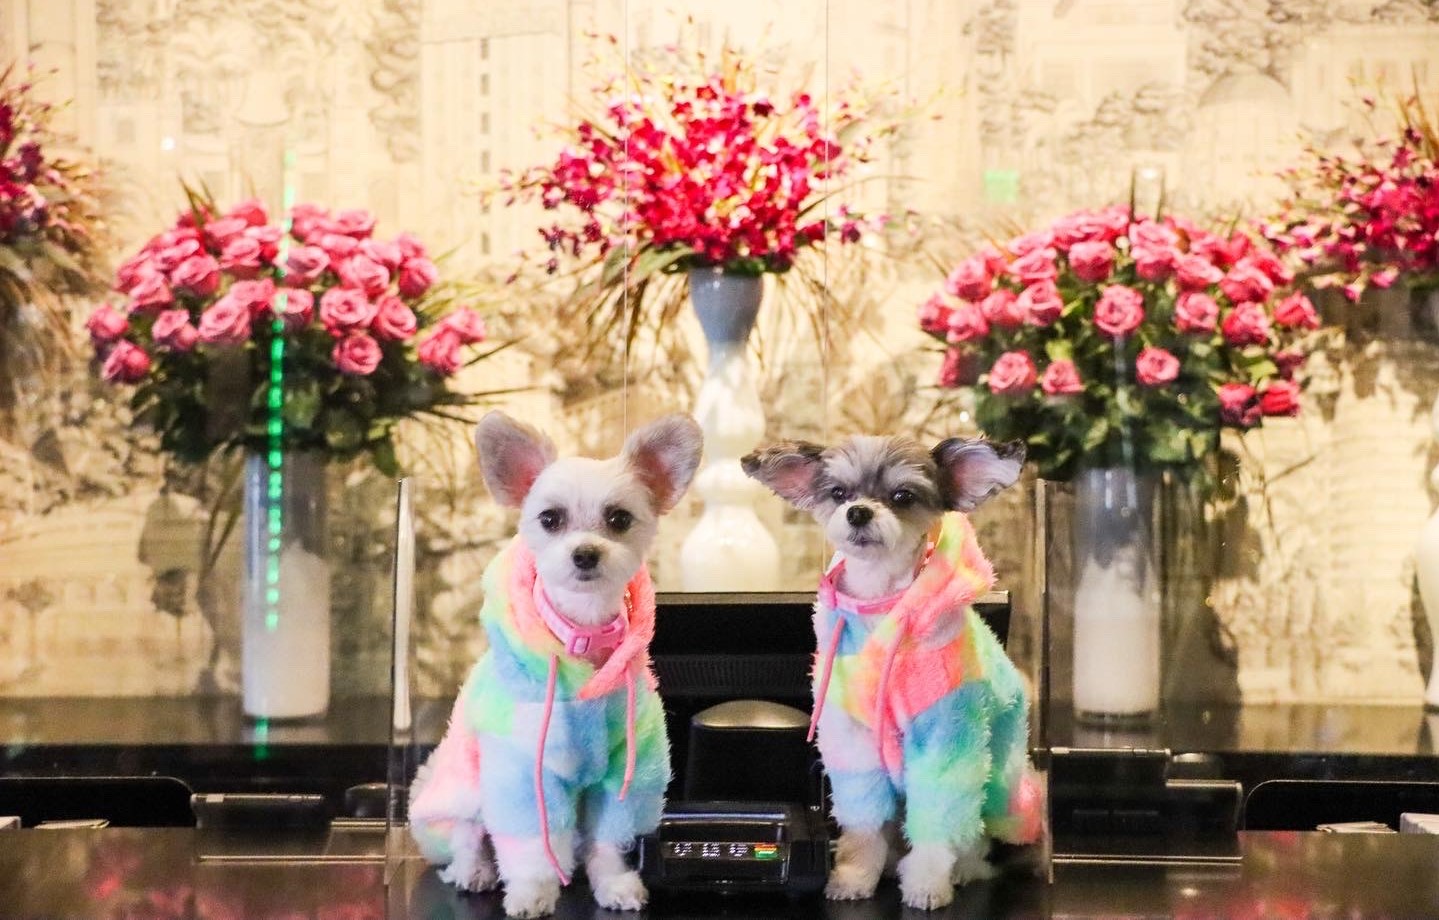 Dog Hoodie Fashion Victim Luxury Pet Clothes Trendy Famous brand